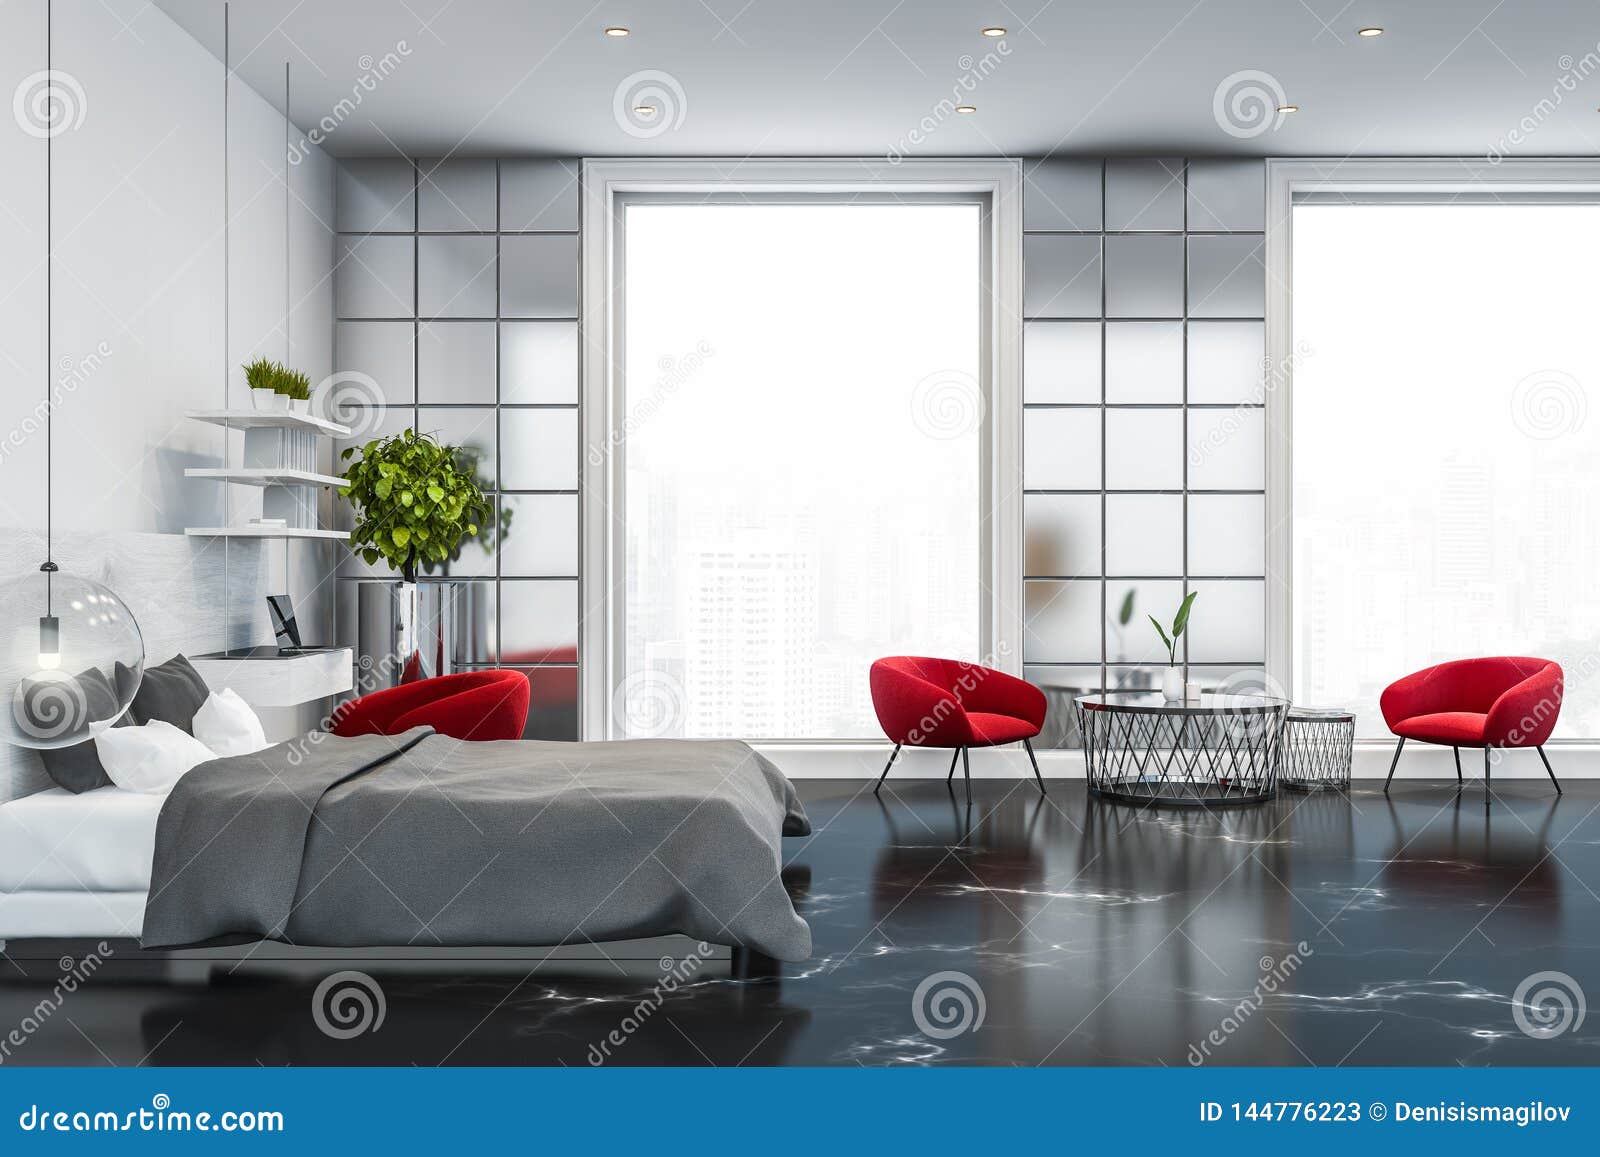 Luxury Bedroom With Coffee Table And Red Armchairs Stock Illustration Illustration Of Furniture